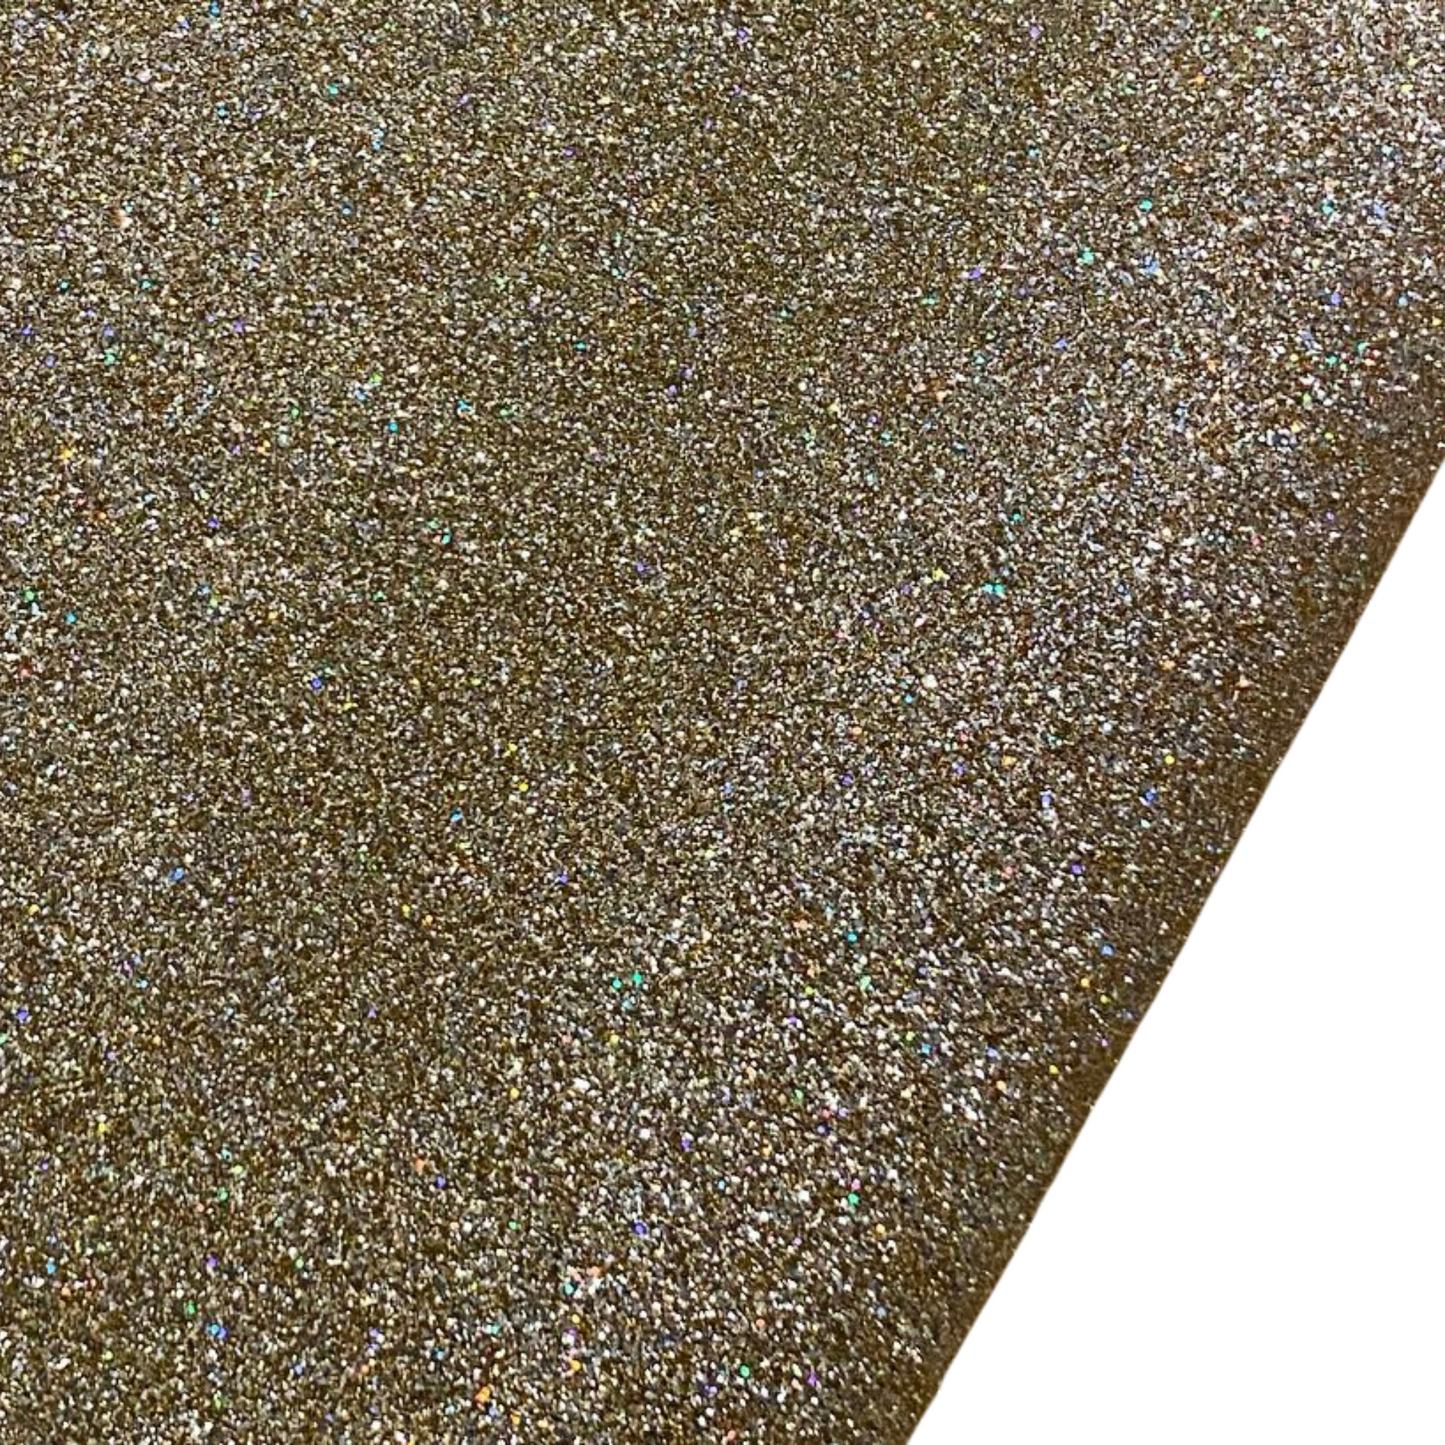 Gold Holo Floppy Fine Glitter (Best For Pinch Bows)